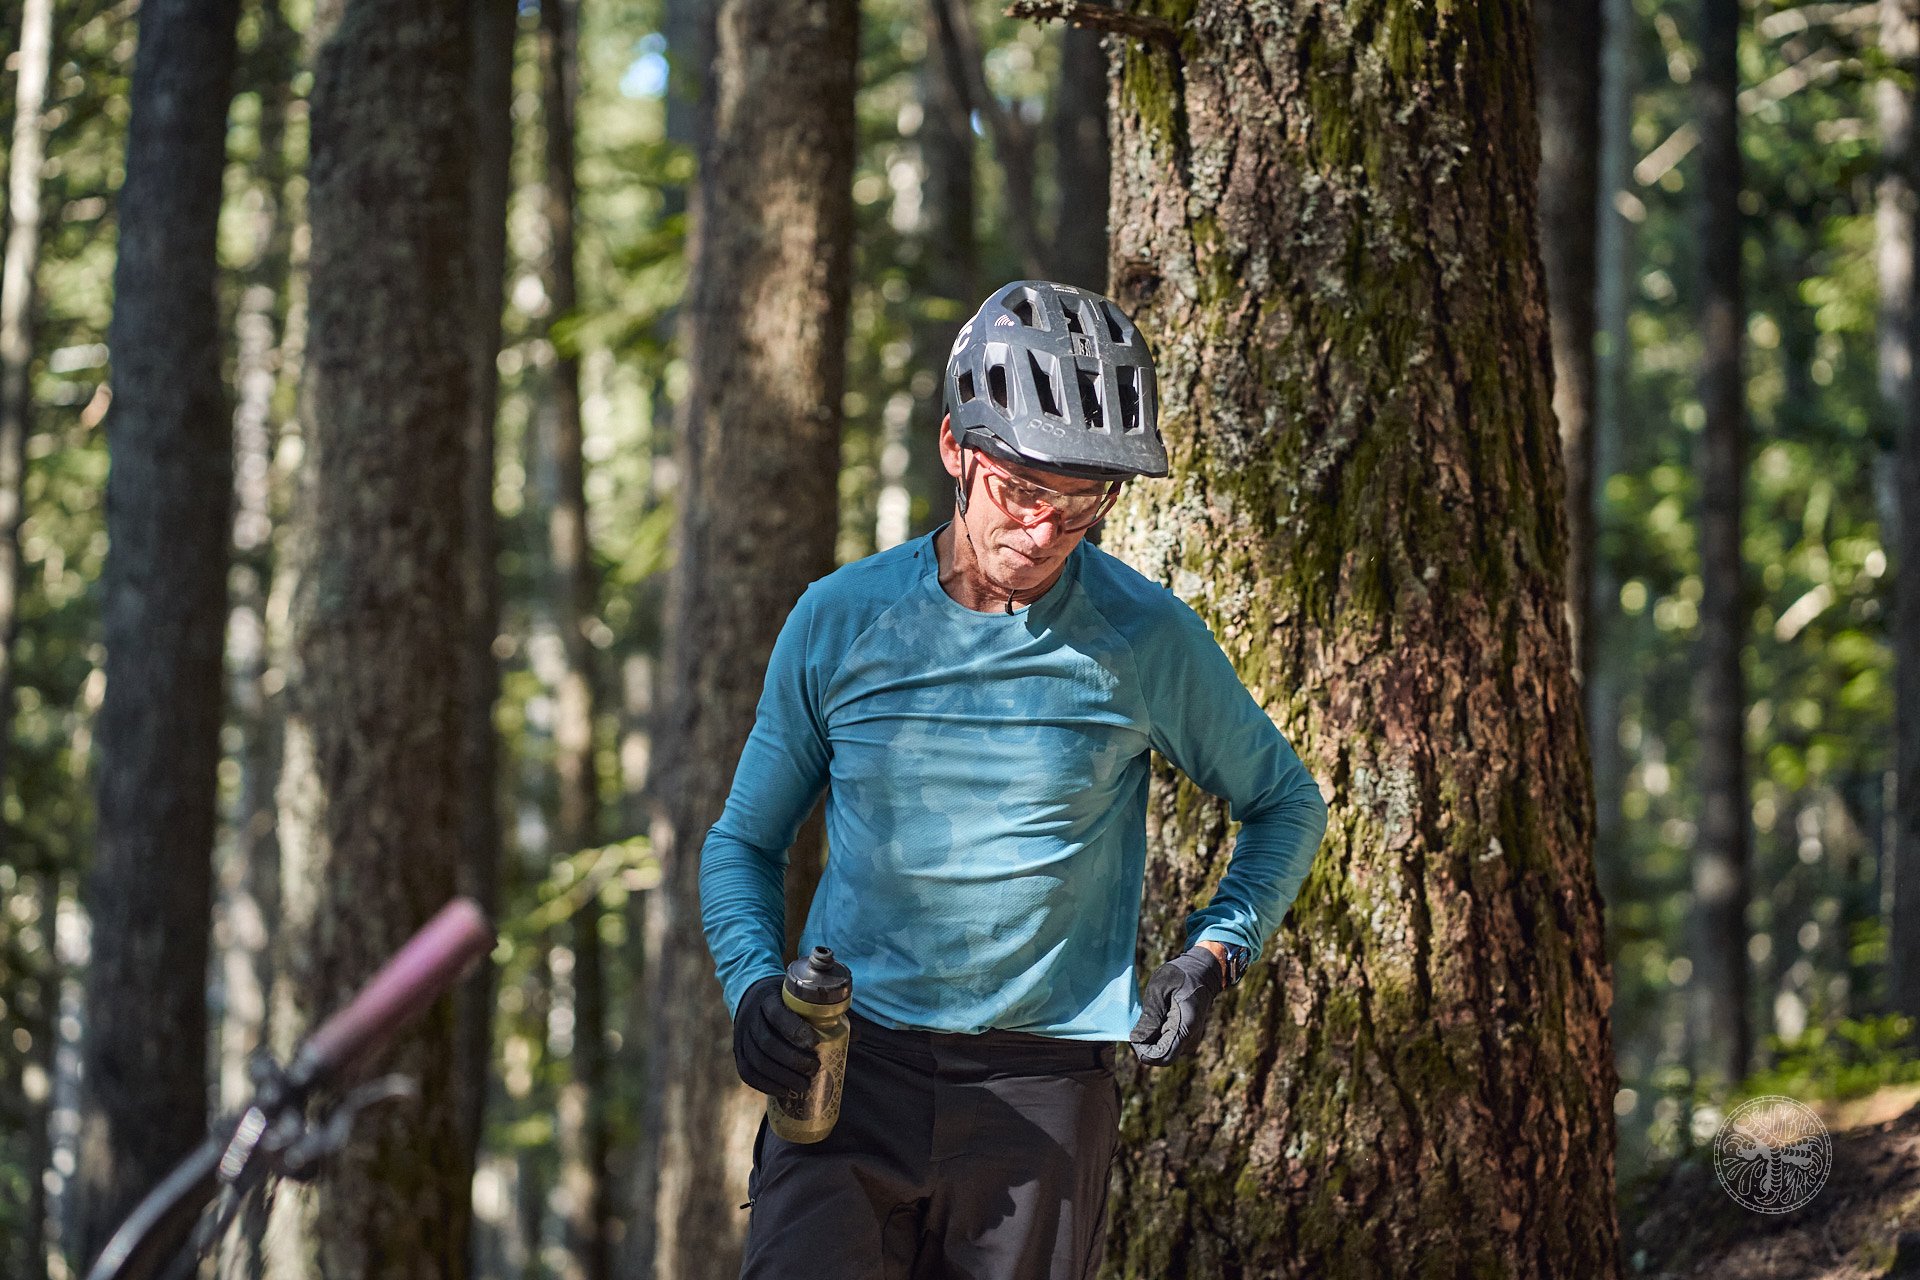 Review: Pearl Izumi's Fall Collection - Tech Clothing with Casual Styling -  Pinkbike